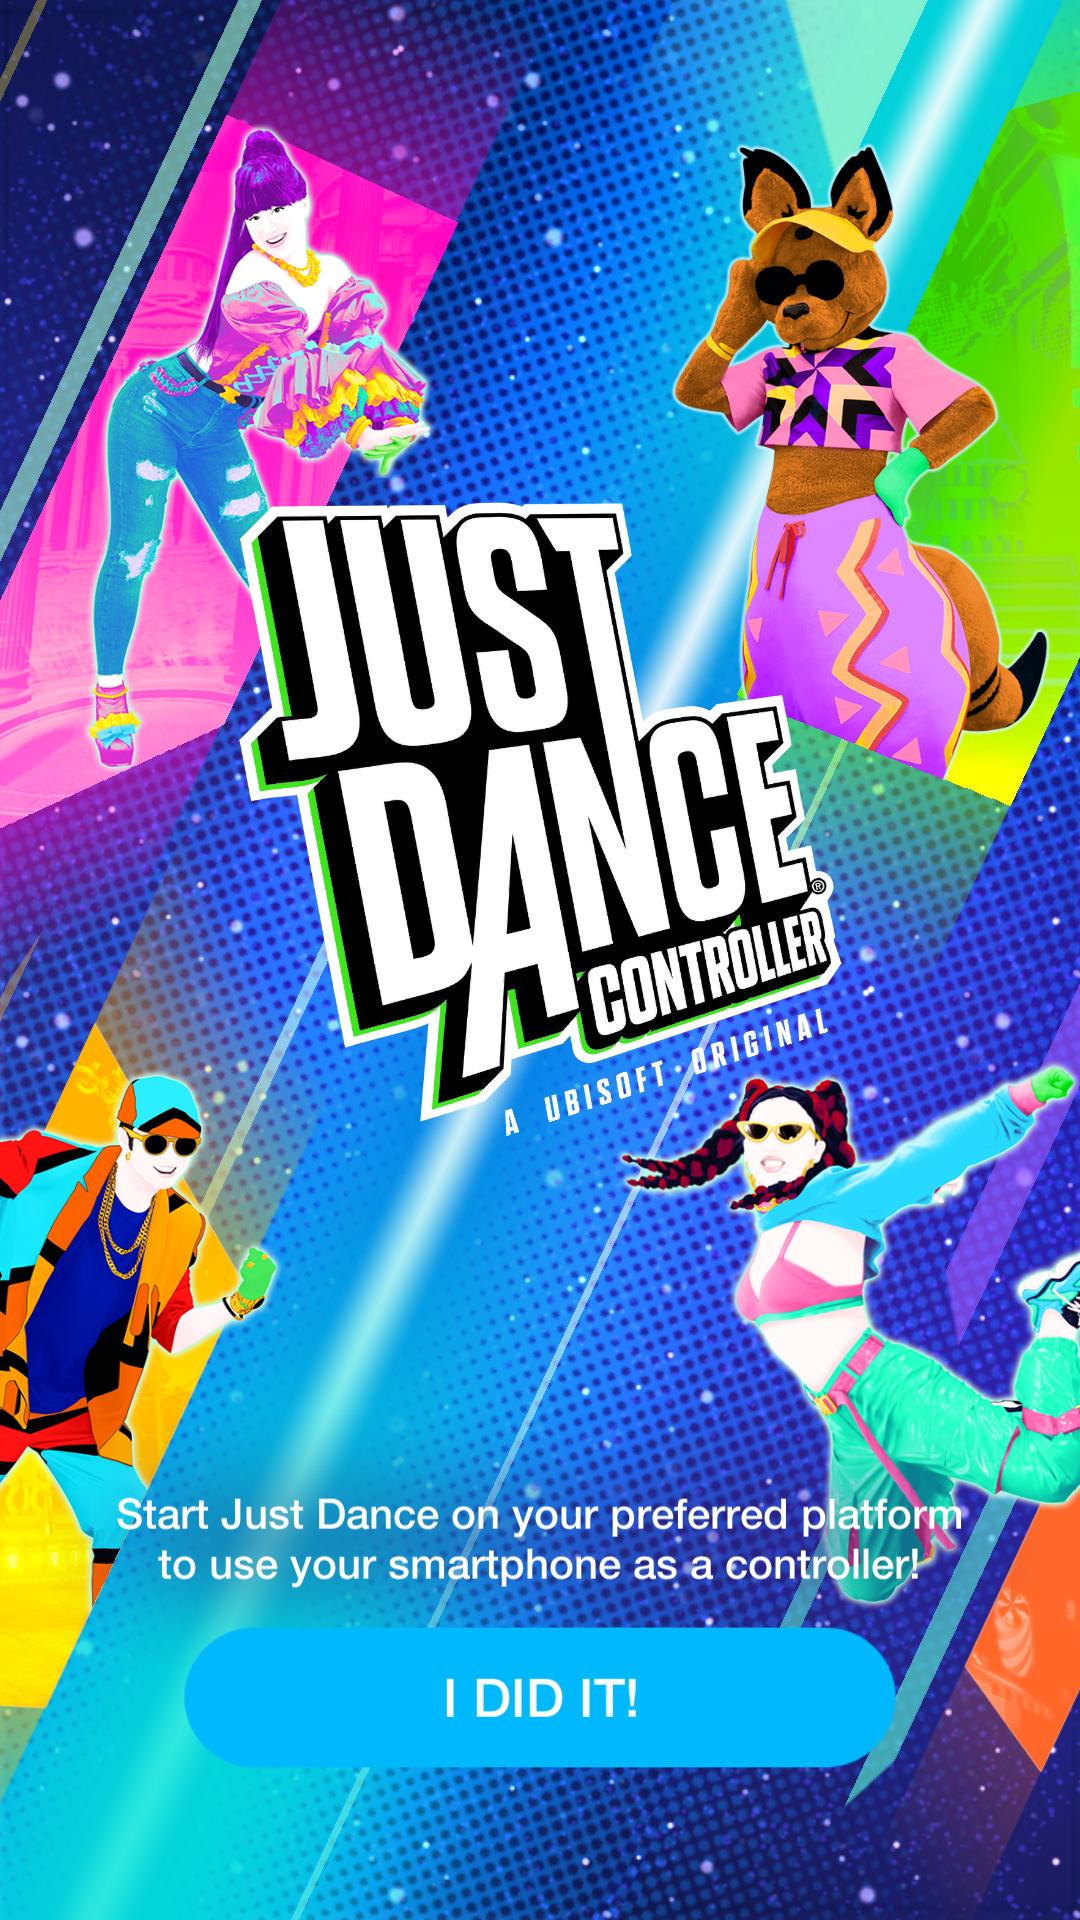 Just Dance Controller for Android - APK Download